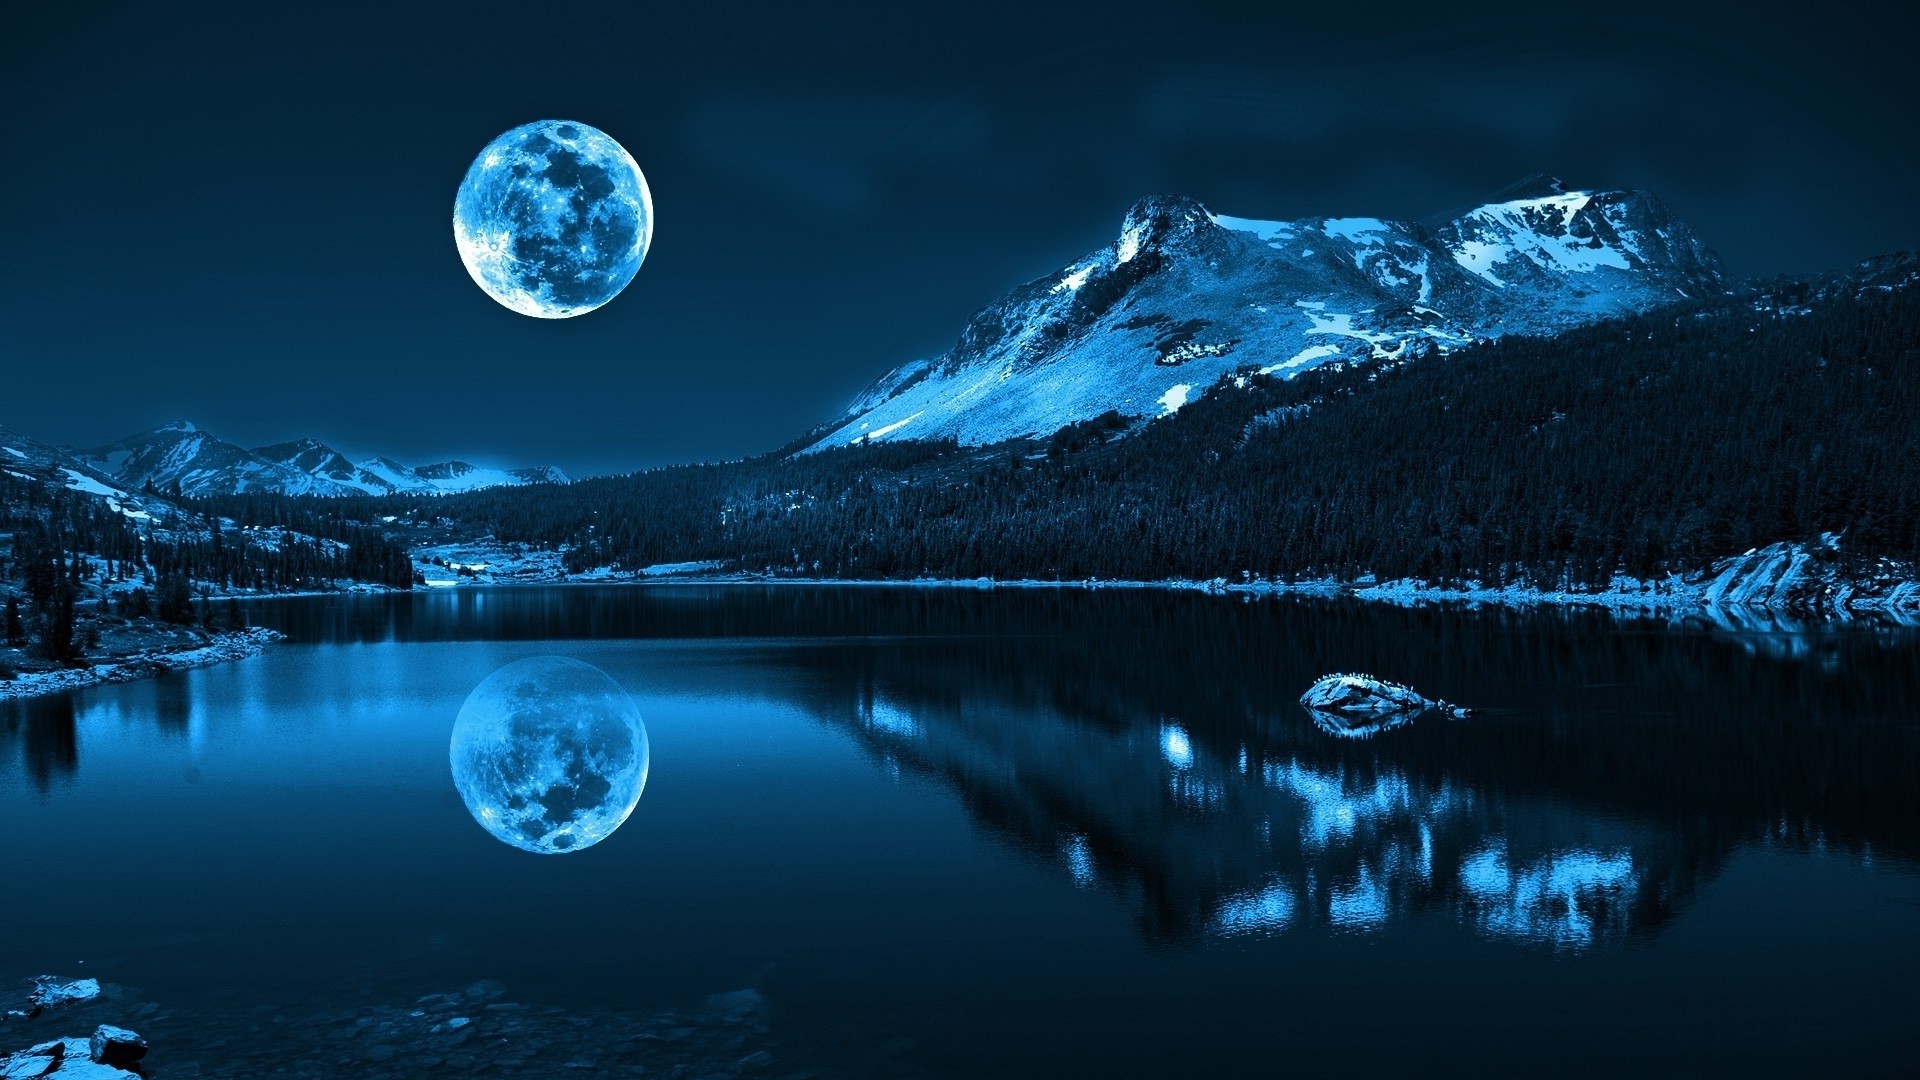 blue, Night, Forest, Trees, Water, Cold, Moon, Mountain, Lake, Reflection, Nature, Landscape Wallpaper